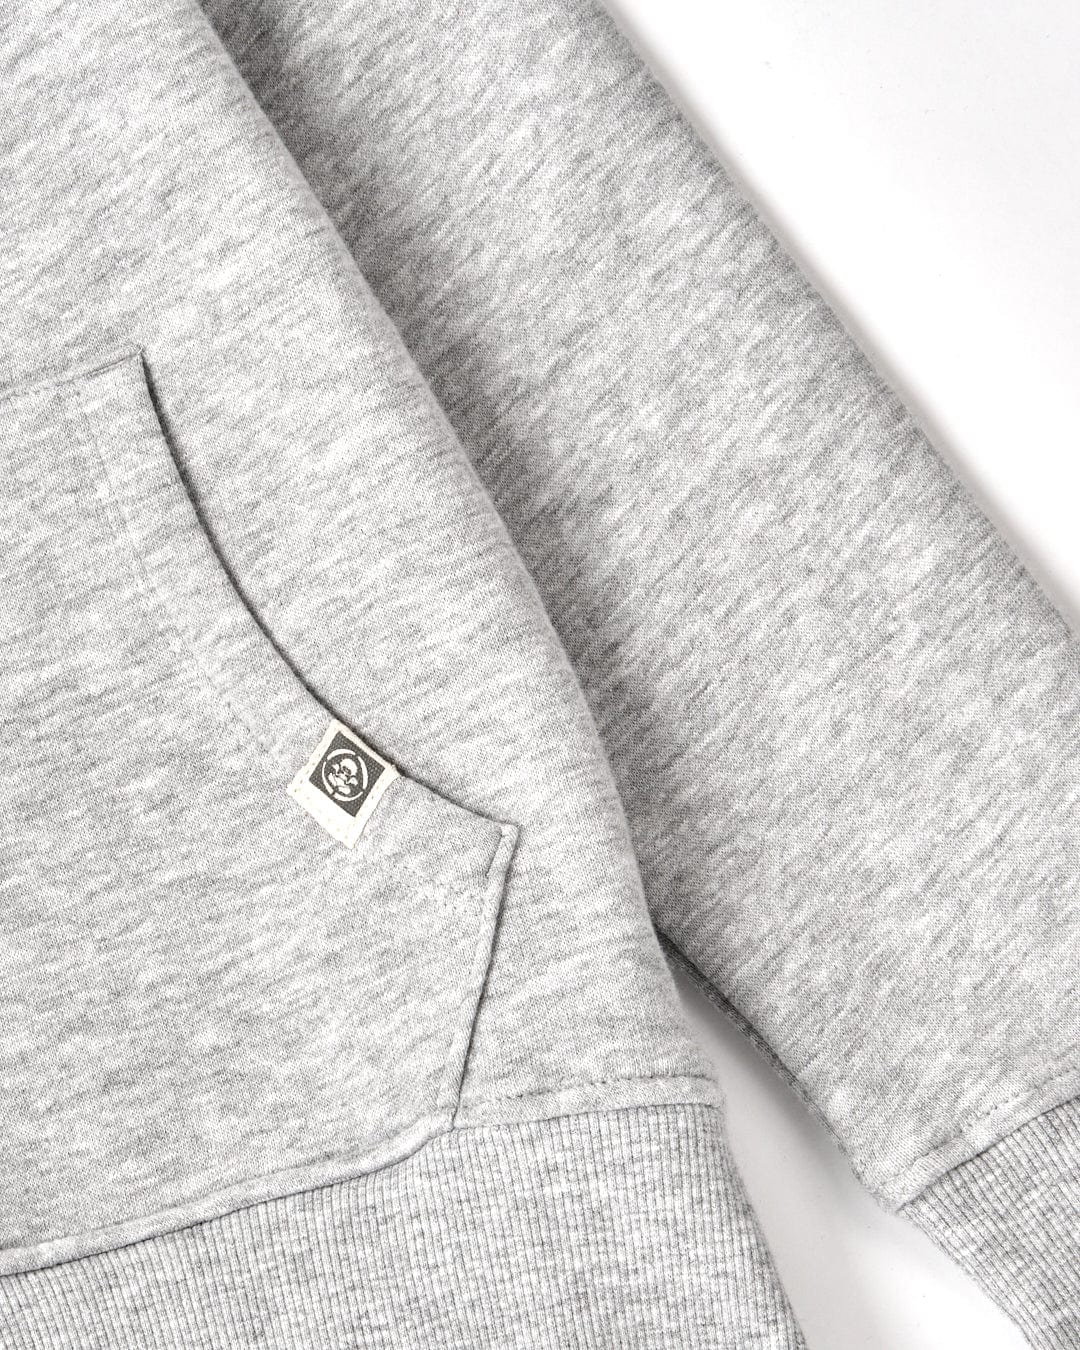 Close-up of a Tok Corp - Recycled Kids Zip Hoodie - Grey Marl with a small Saltrock branding on the chest pocket, alongside gray patterned fabric.